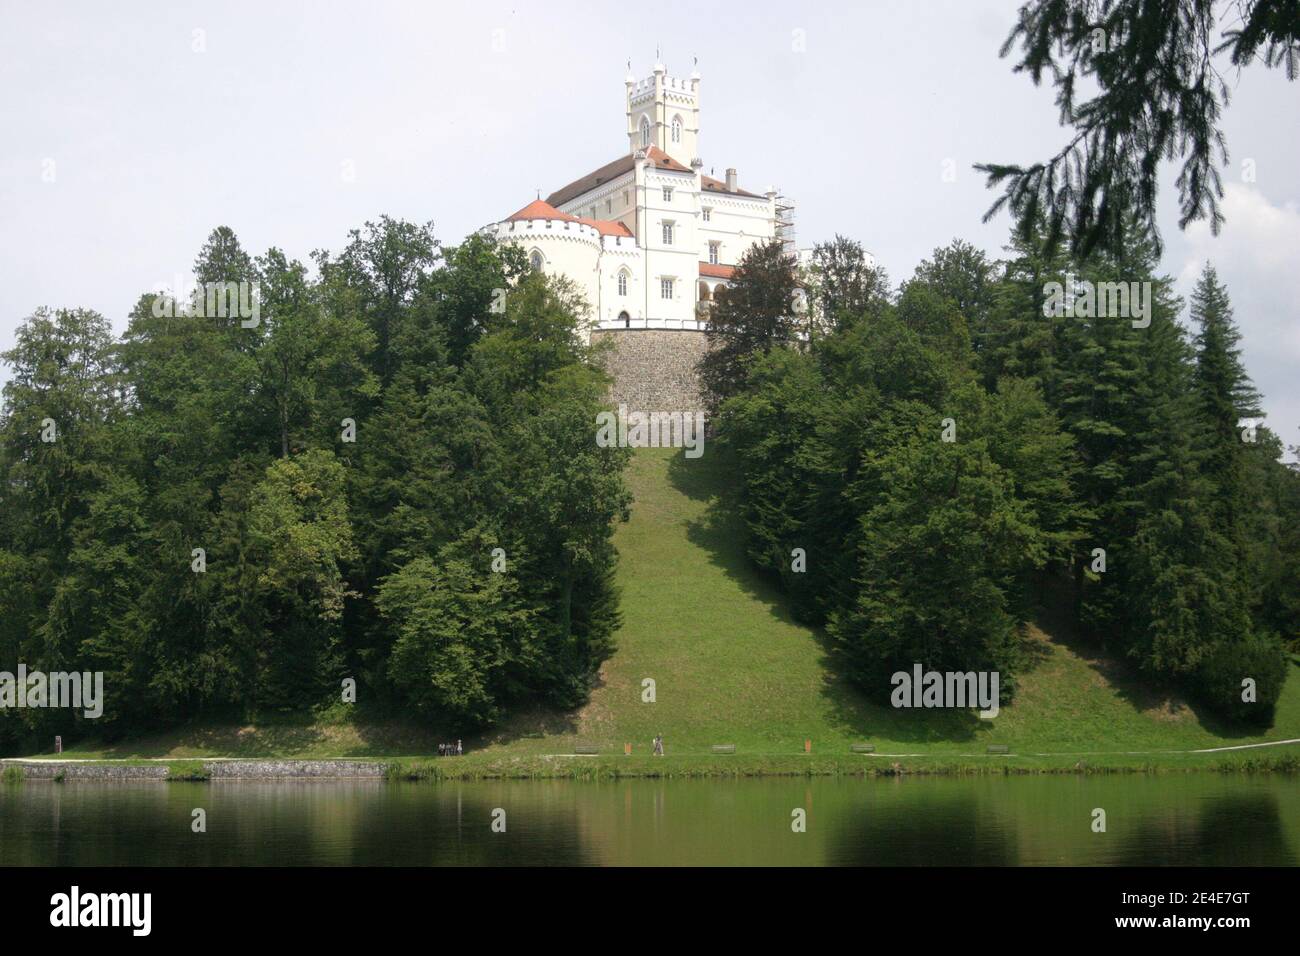 A medieval castle surrounded by forest and a lake Stock Photo